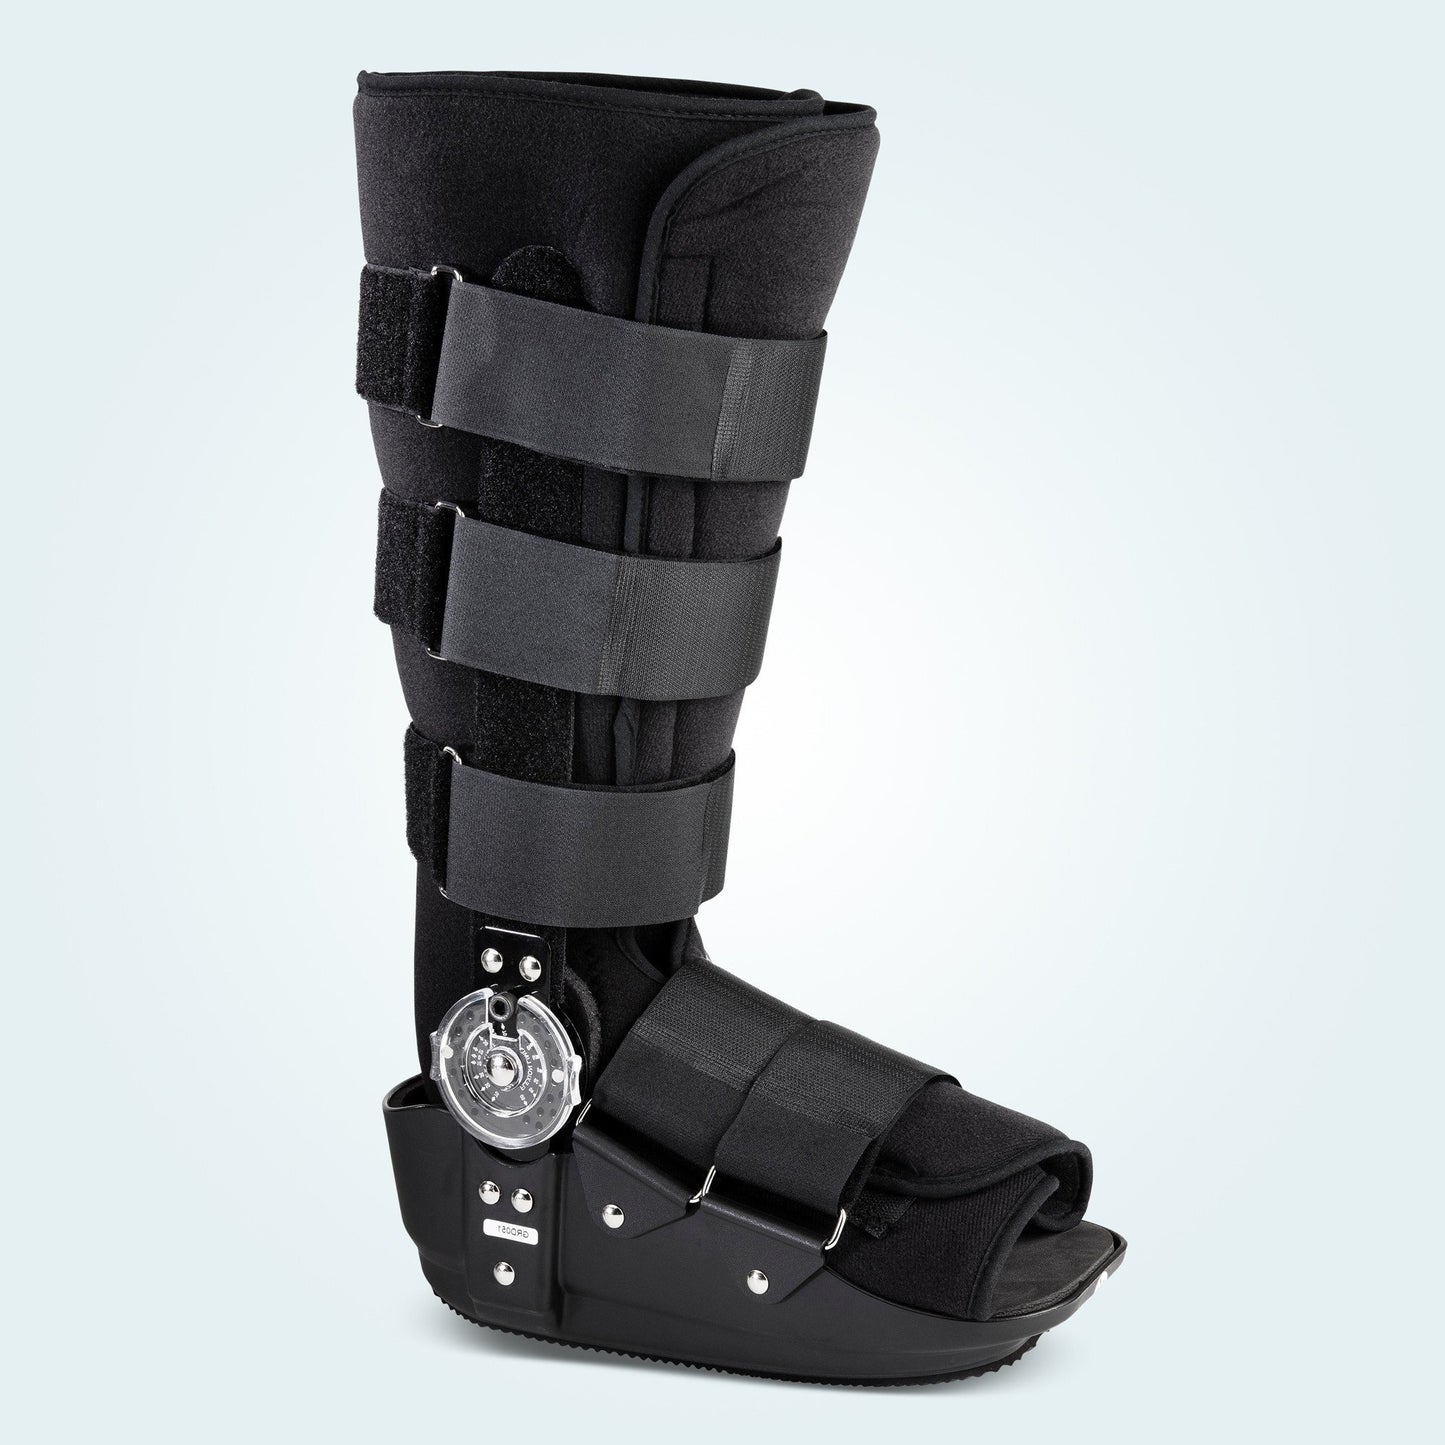 The Benecare ROM Walker Boot provides support and comfort.